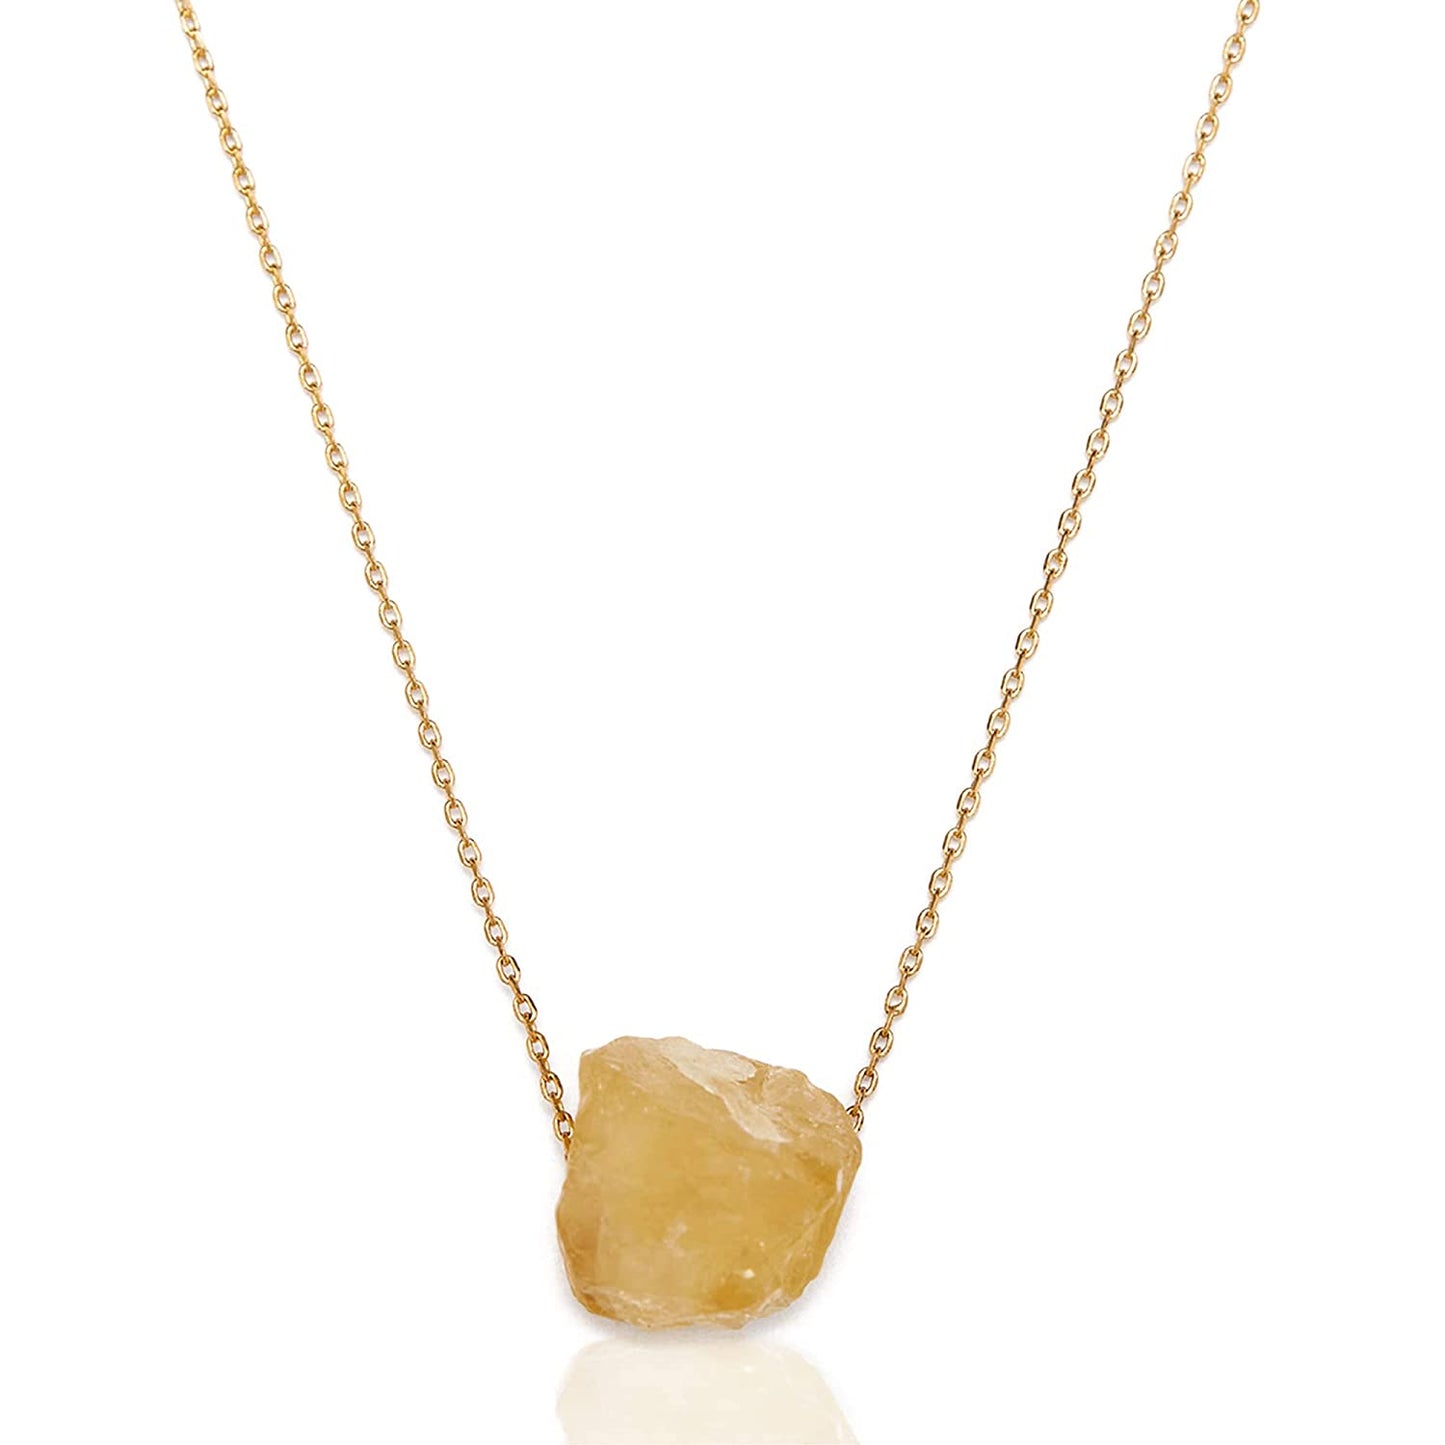 Raw Crystal Necklace for Women with Gold Colored Adjustable Chain - Raw Crystal Necklace for Spiritual Healing